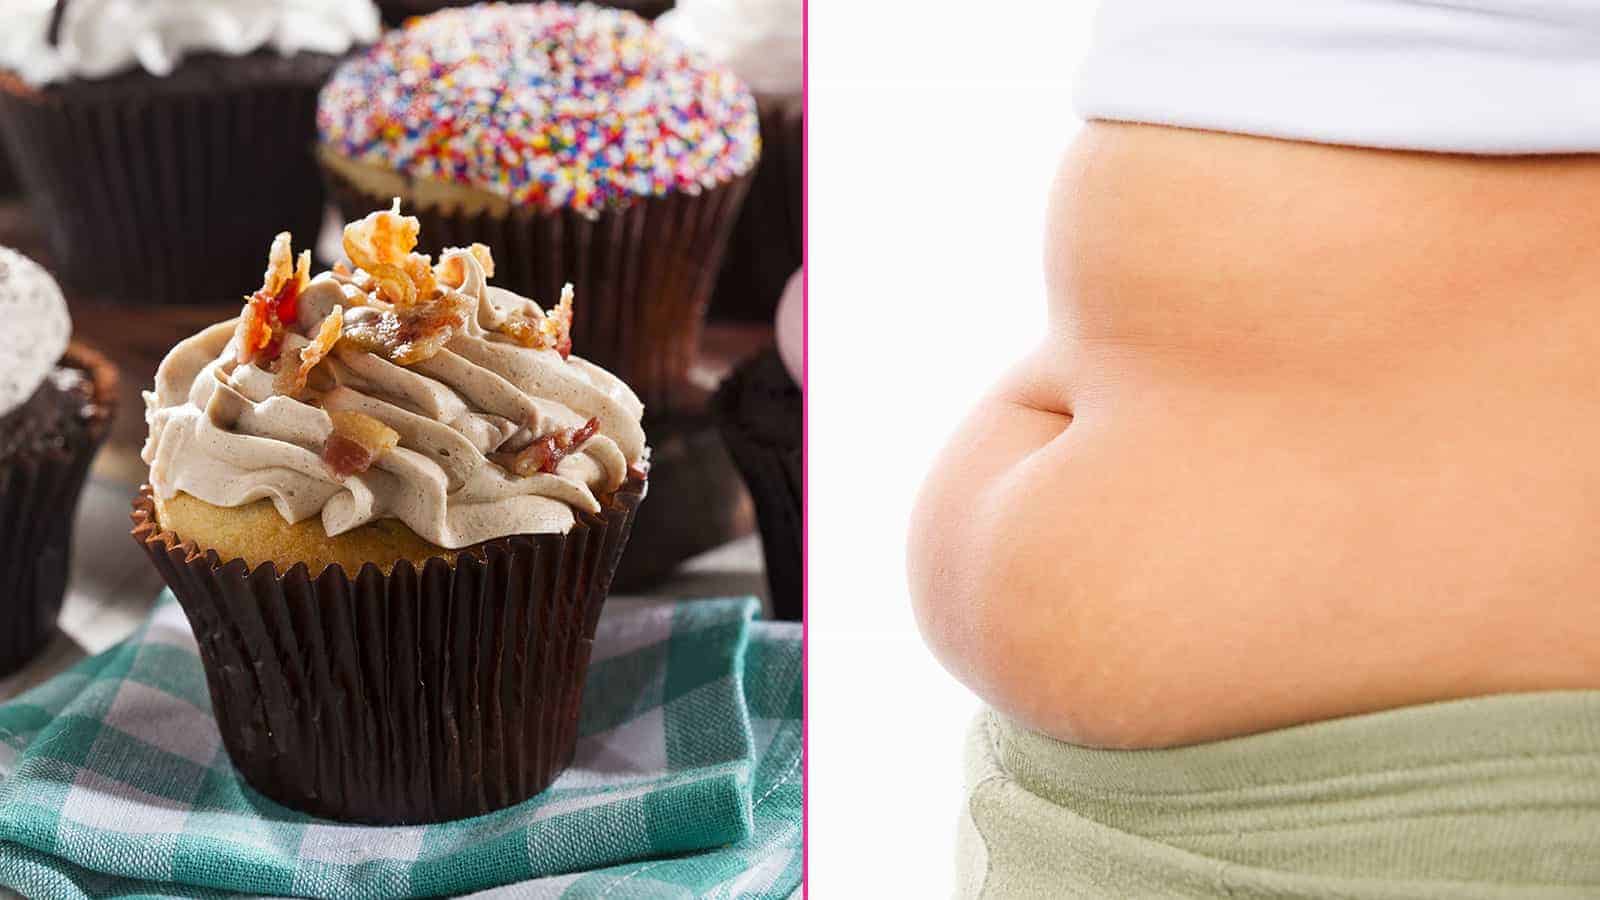 7 Signs You Are Addicted to Sugar